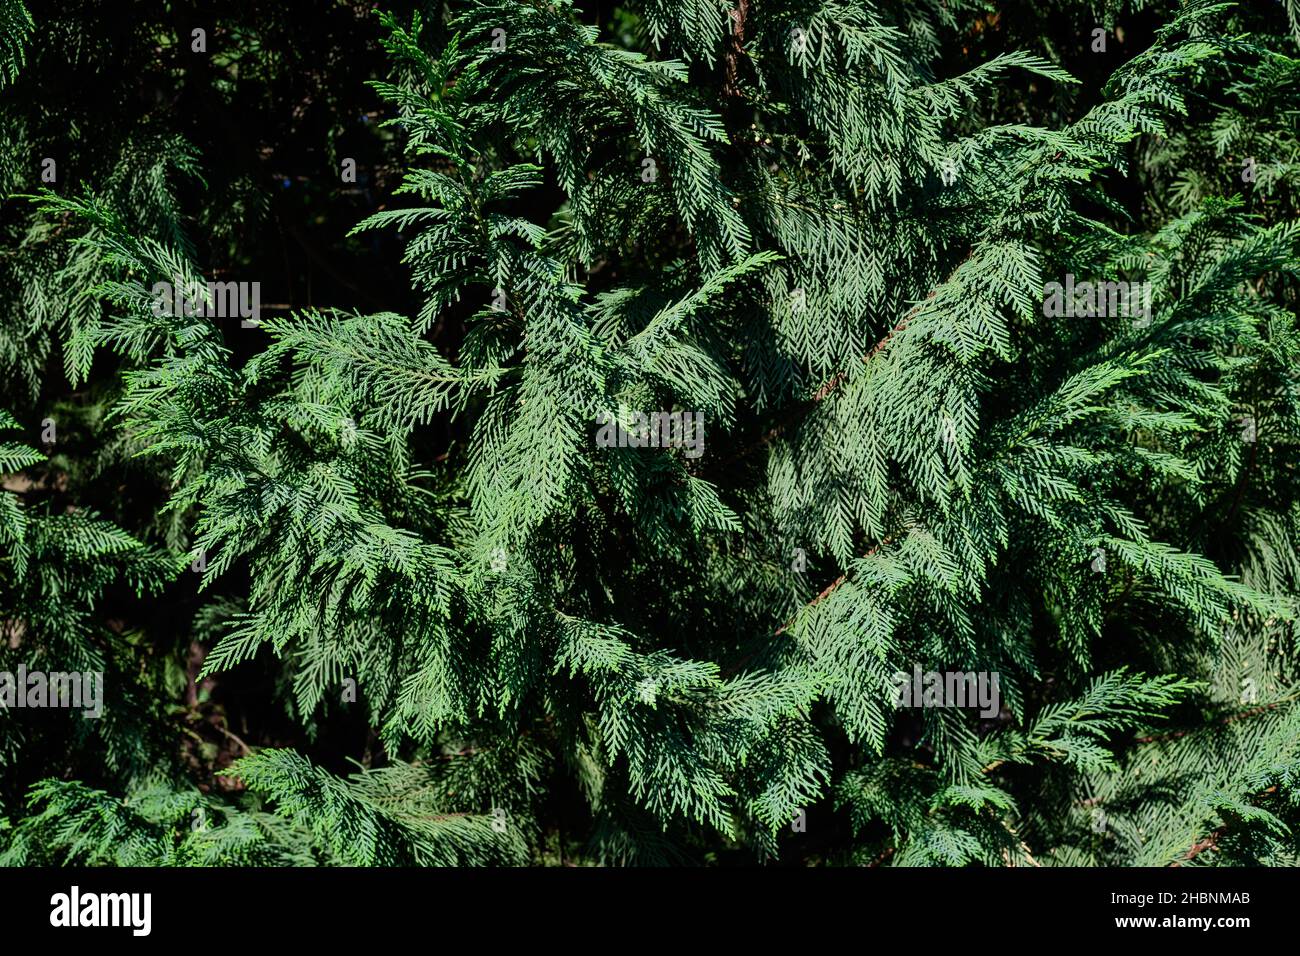 Many small vivid green leaves of Thuja coniferous tree, commonly known asarborvitaes, thujas or cedars in a garden in a sunny summer day Stock Photo